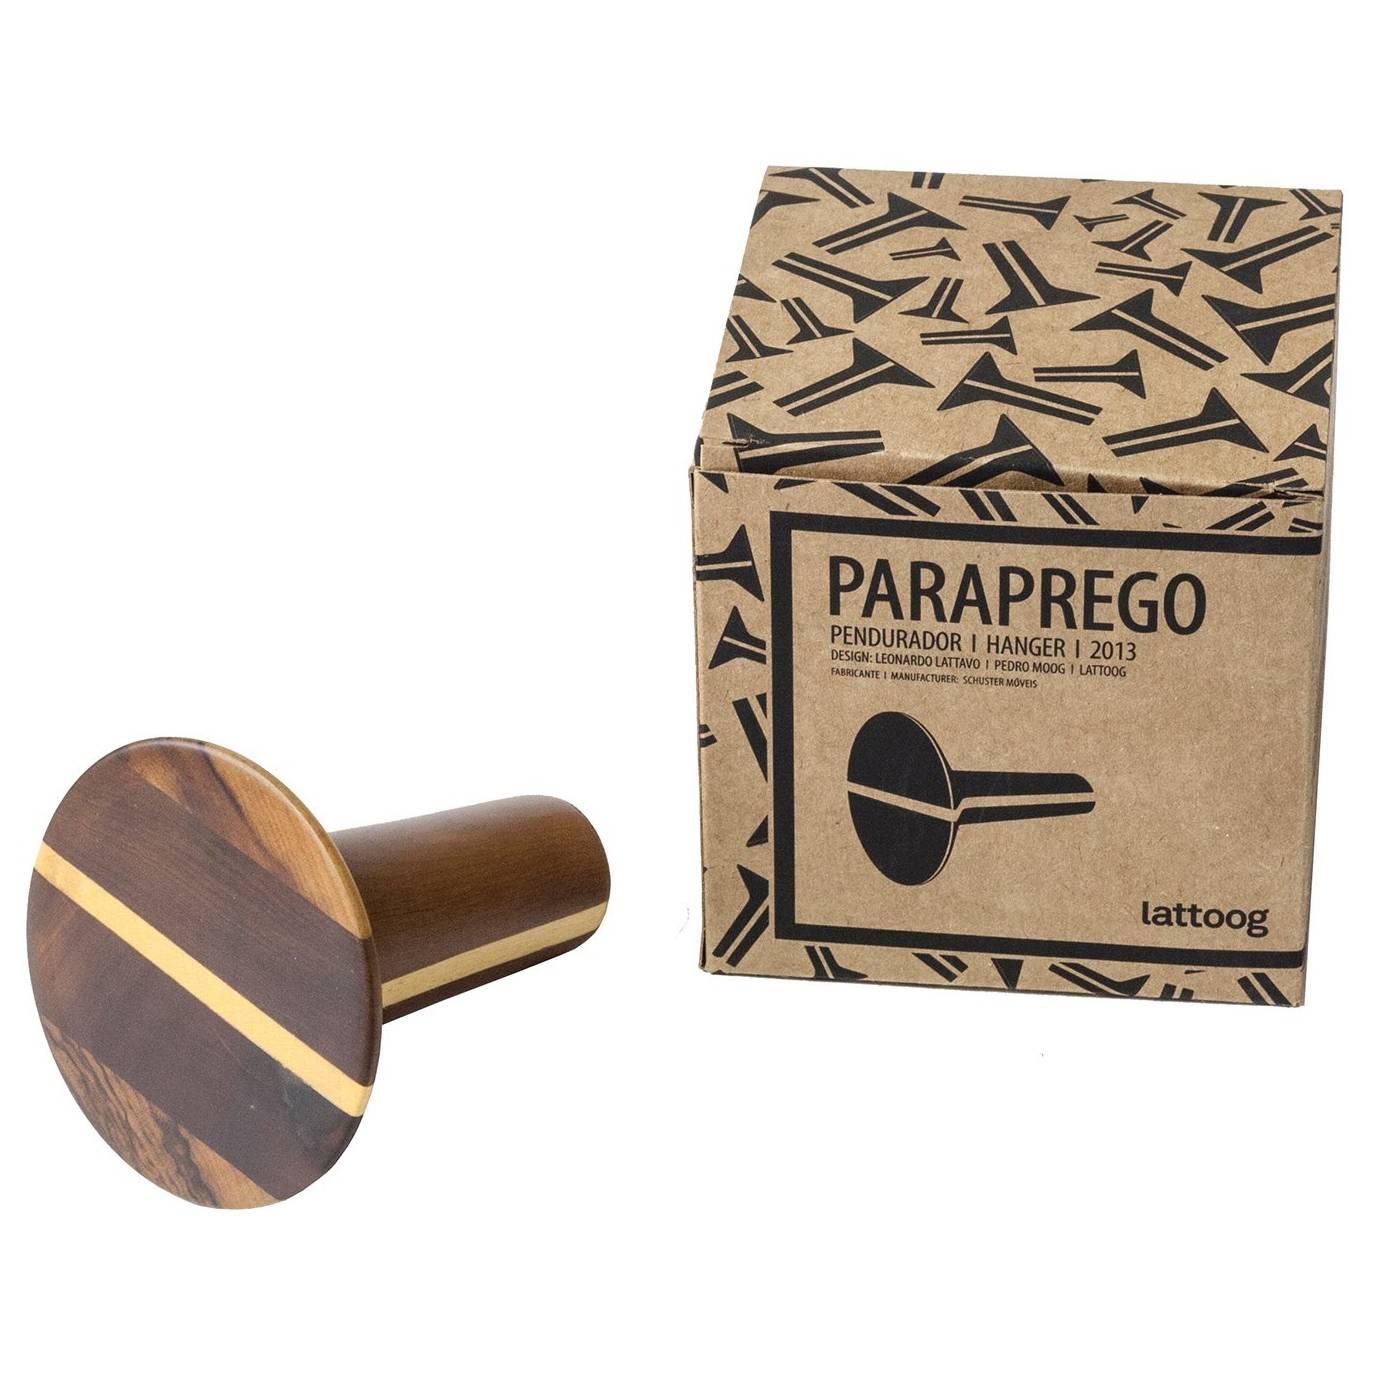 Paraprego Brazilian Contemporary Solid Turned Wood Coat Hanger by Lattoog